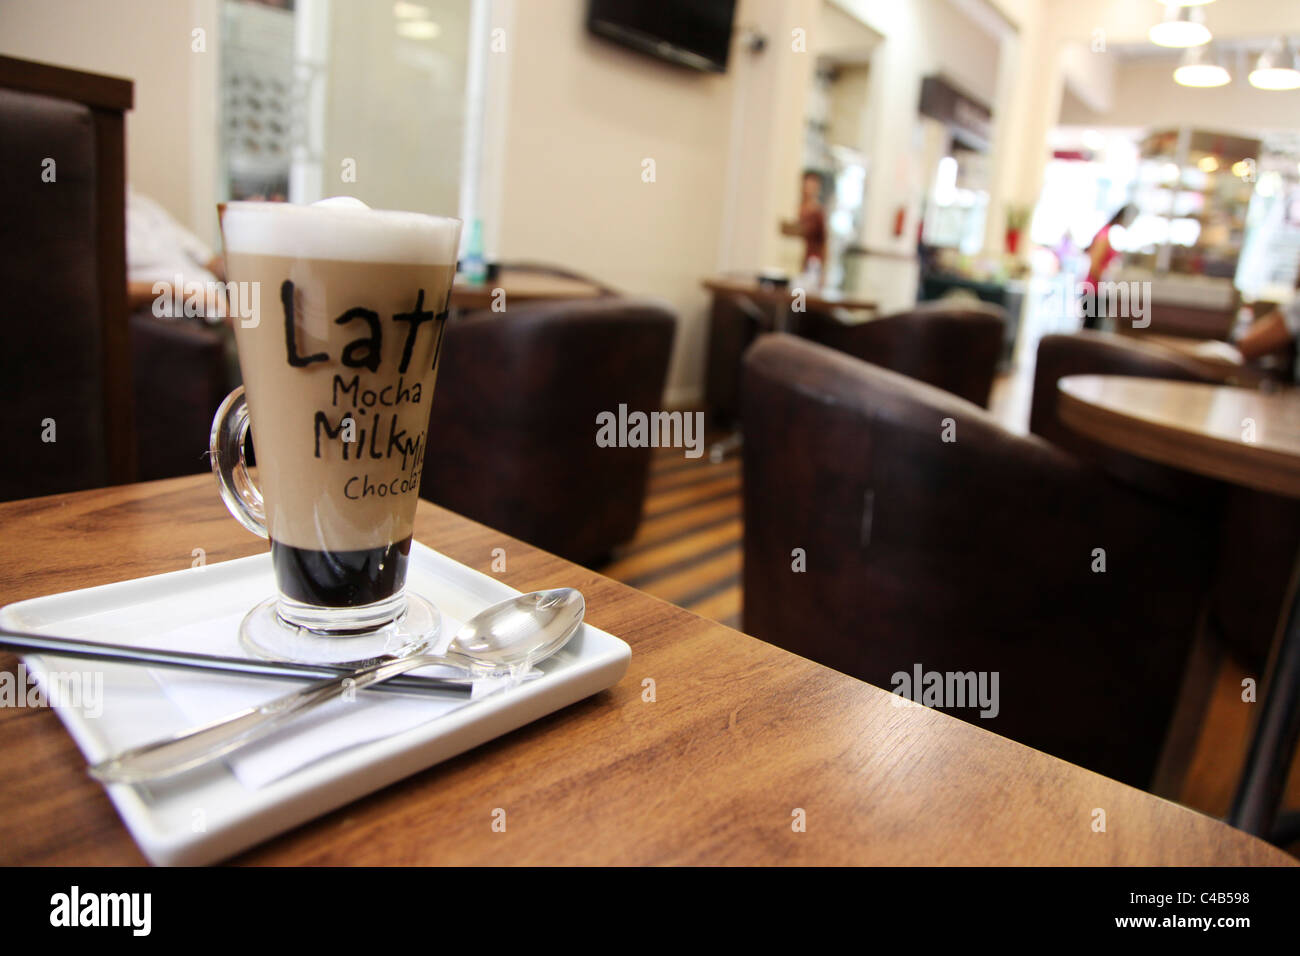 Cafe in Florianopolis, capital of the state of Santa Catarina. Stock Photo